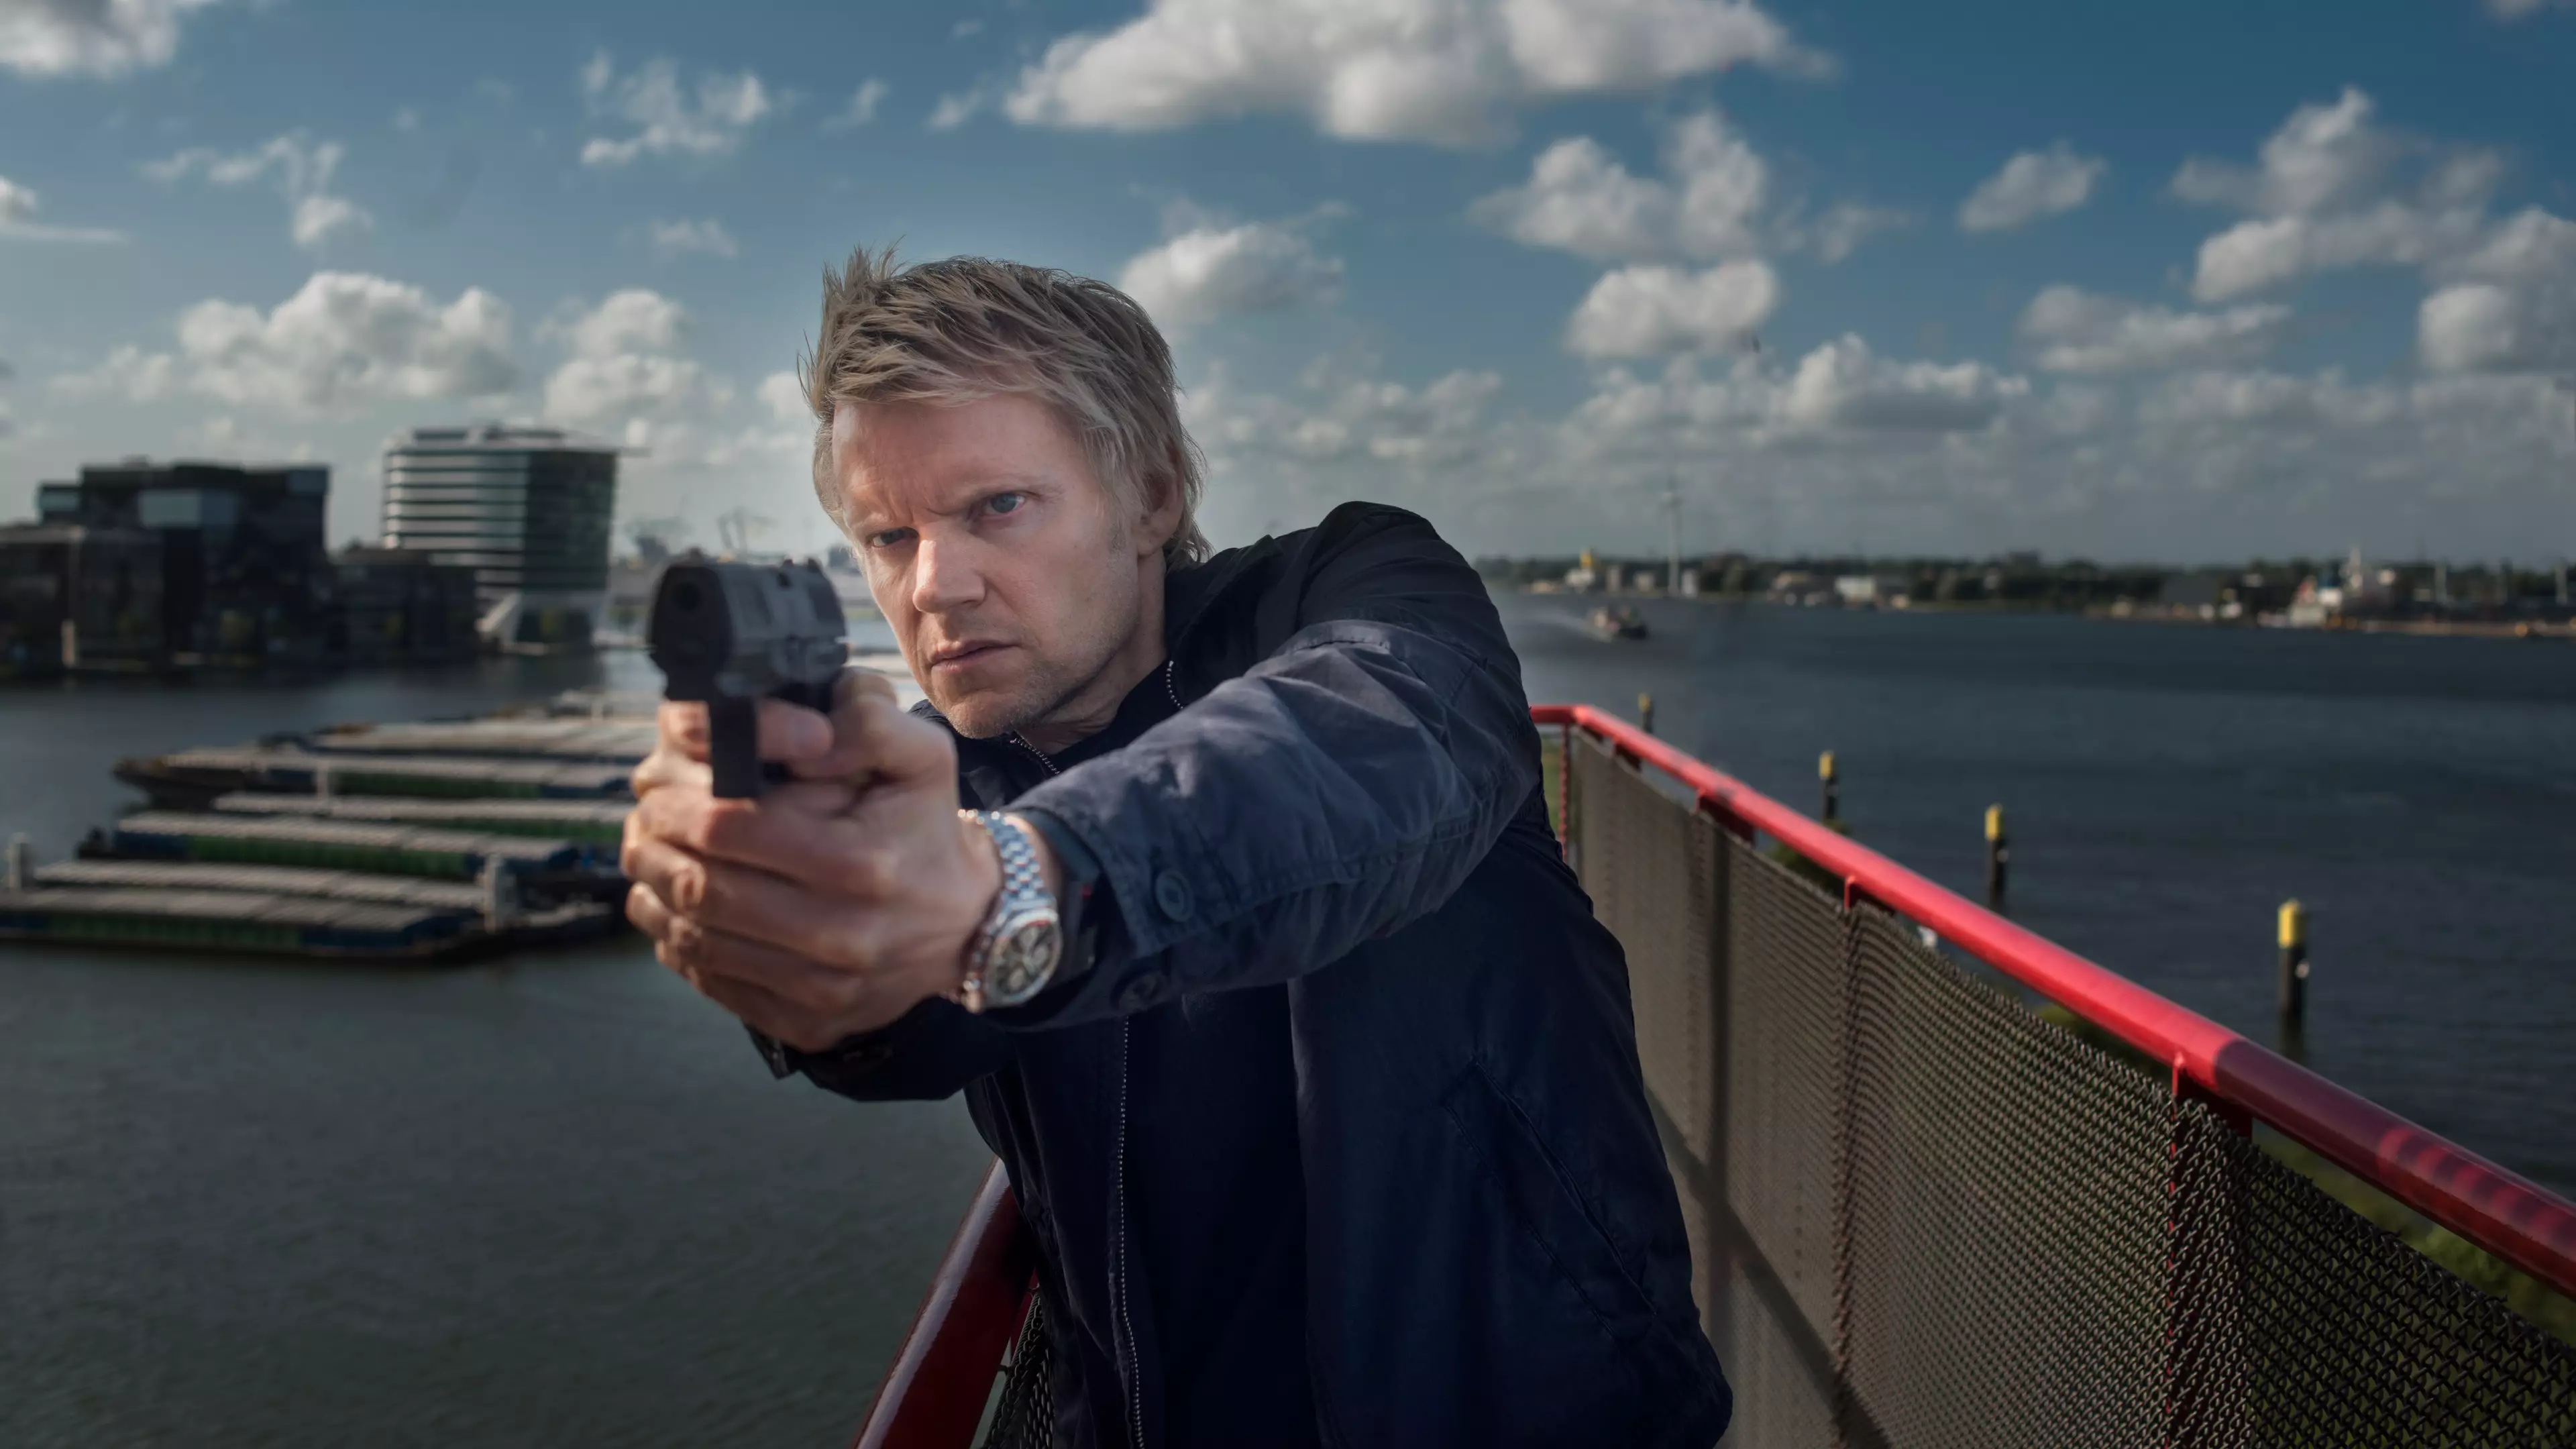 New Detective Drama 'Van Der Valk' Is Coming To ITV This Month